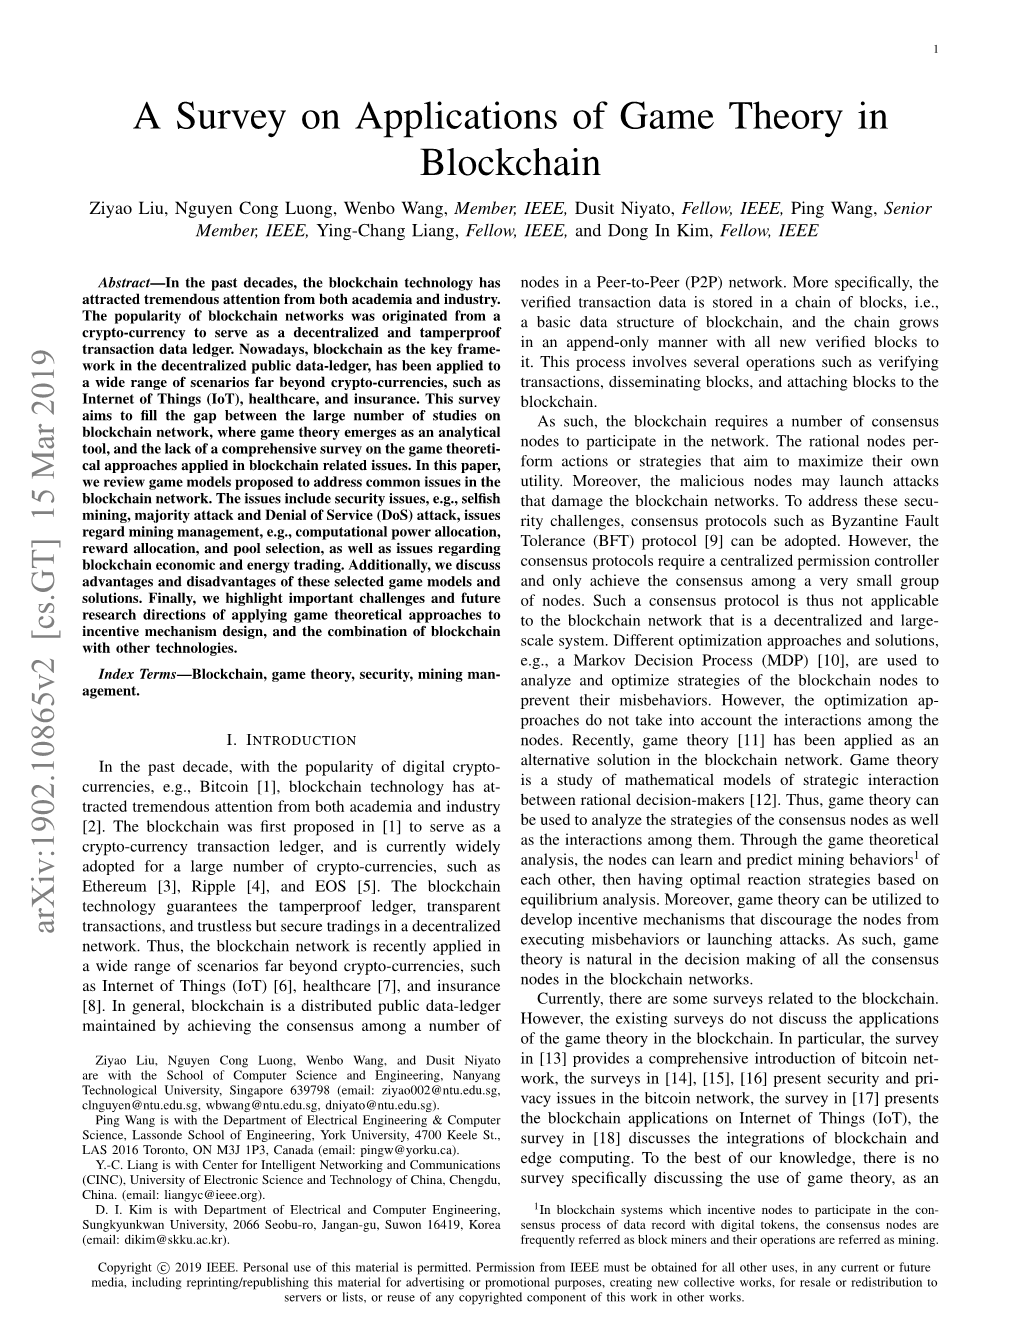 A Survey on Applications of Game Theory in Blockchain